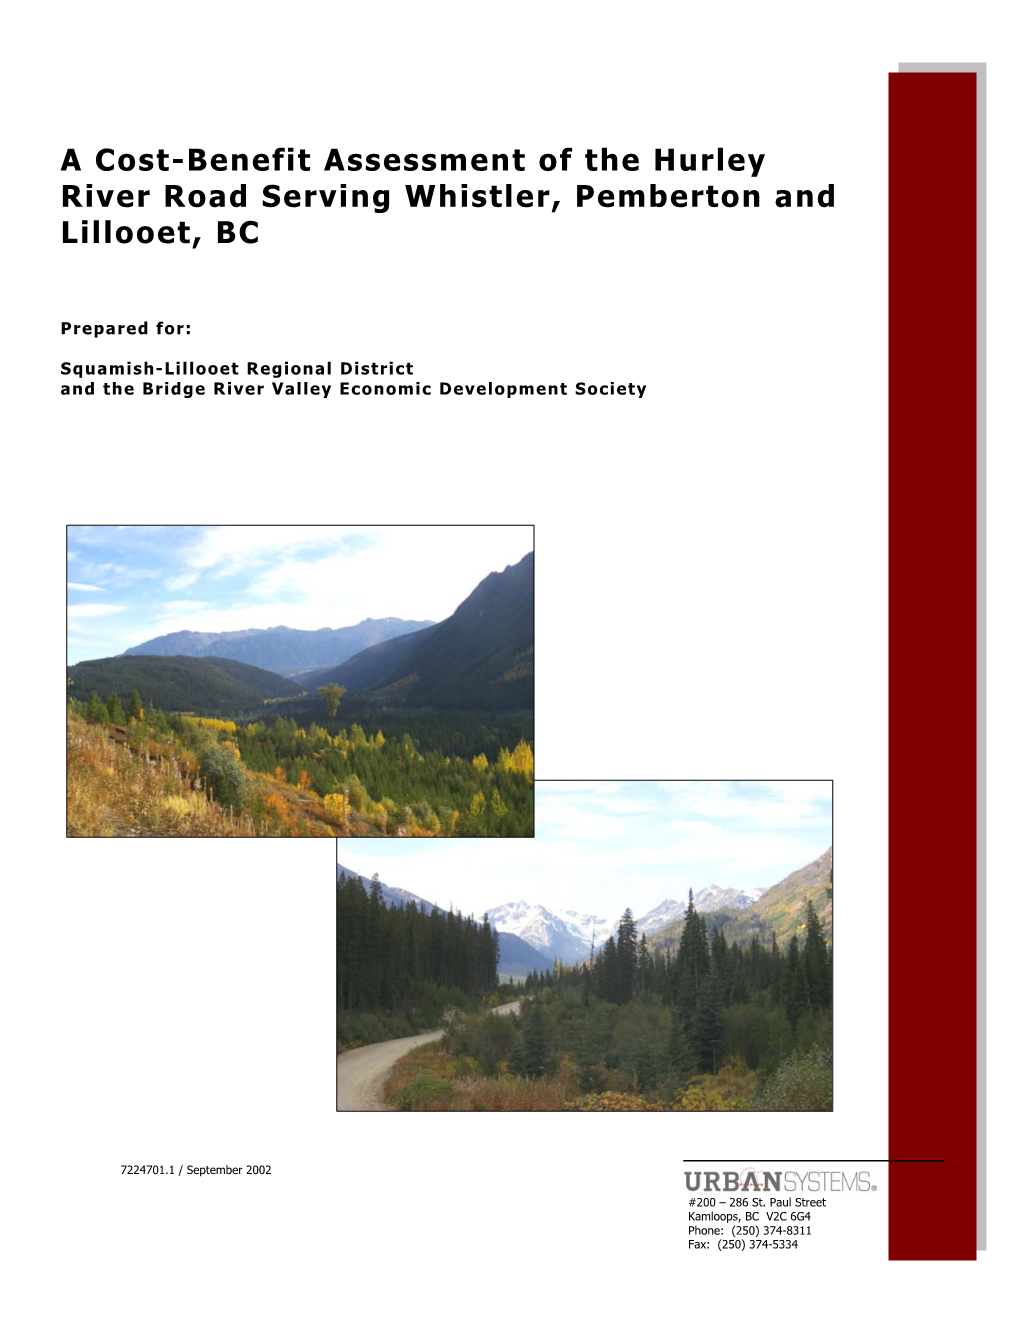 A Cost-Benefit Assessment of the Hurley River Road Serving Whistler, Pemberton and Lillooet, BC